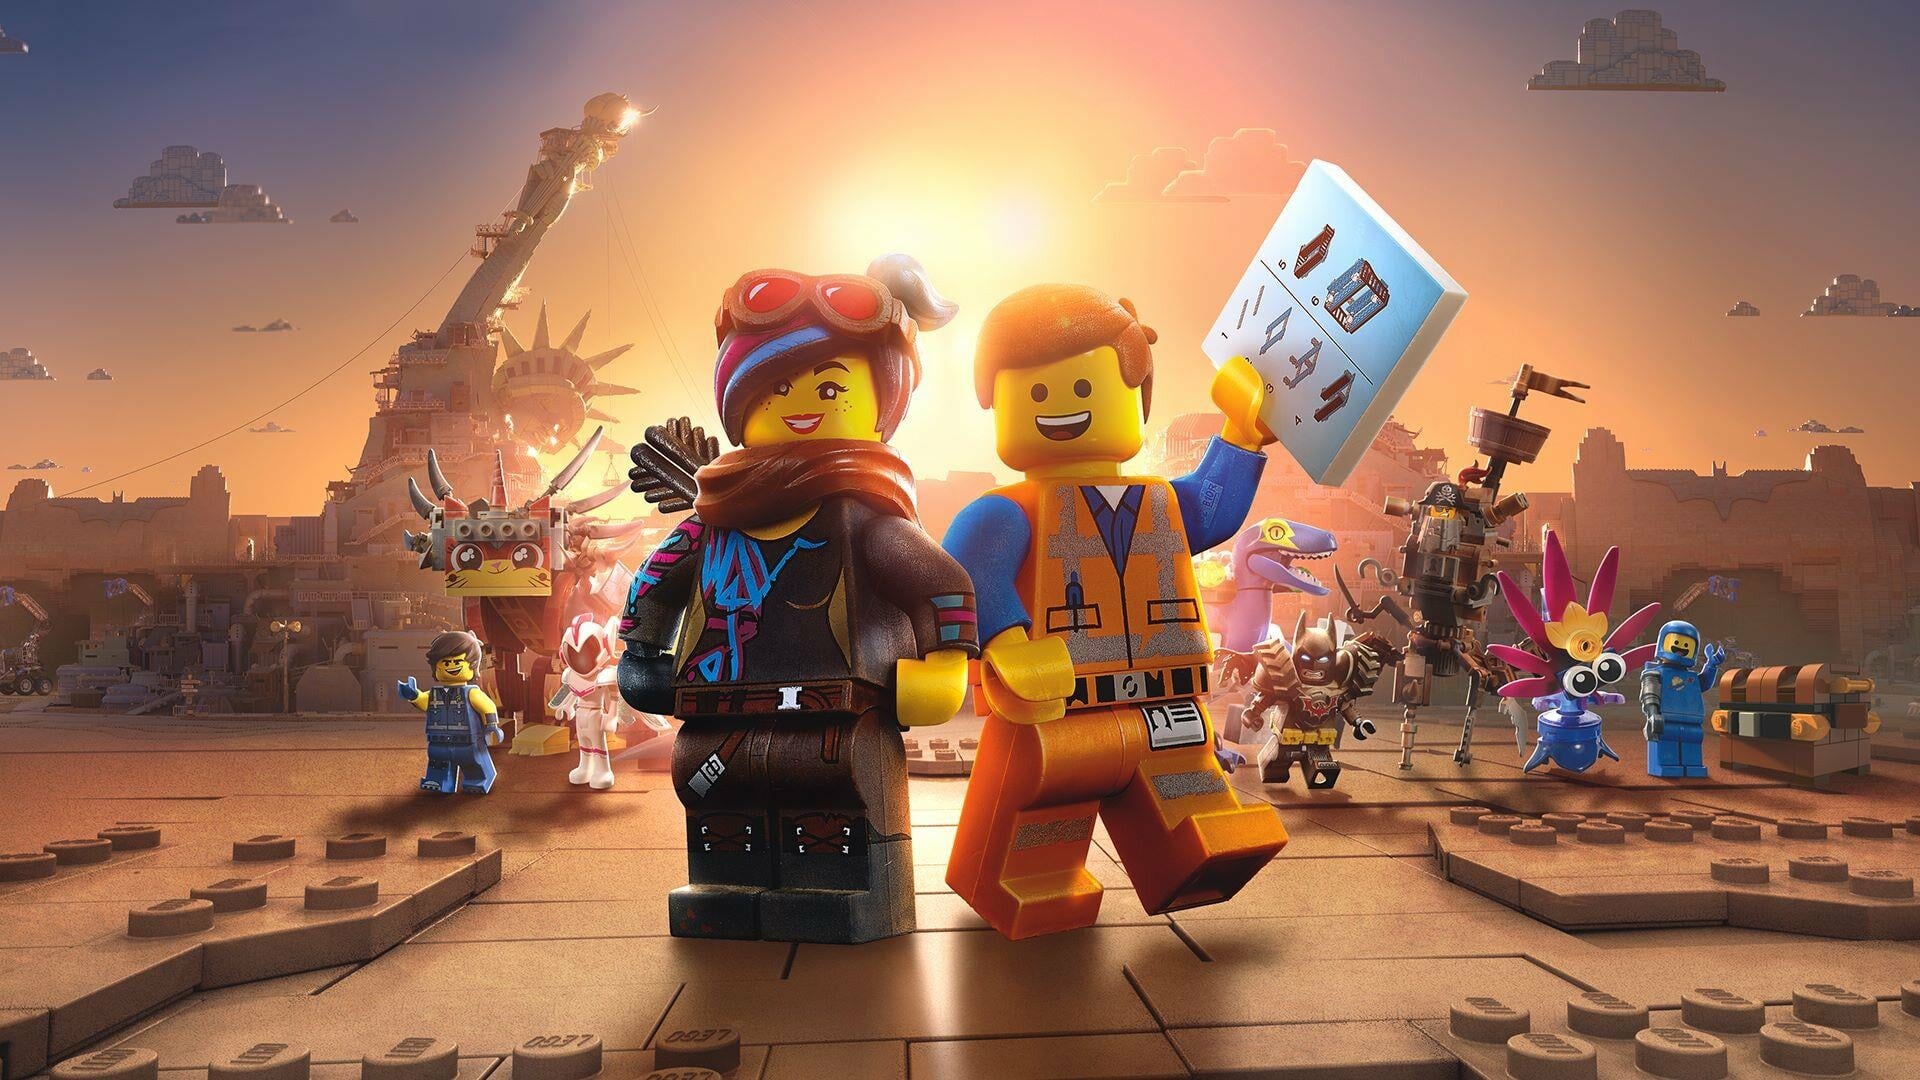 The Lego Movie: A 2019 computer-animated adventure comedy film produced by the Warner Animation Group, Lucy. 1920x1080 Full HD Background.